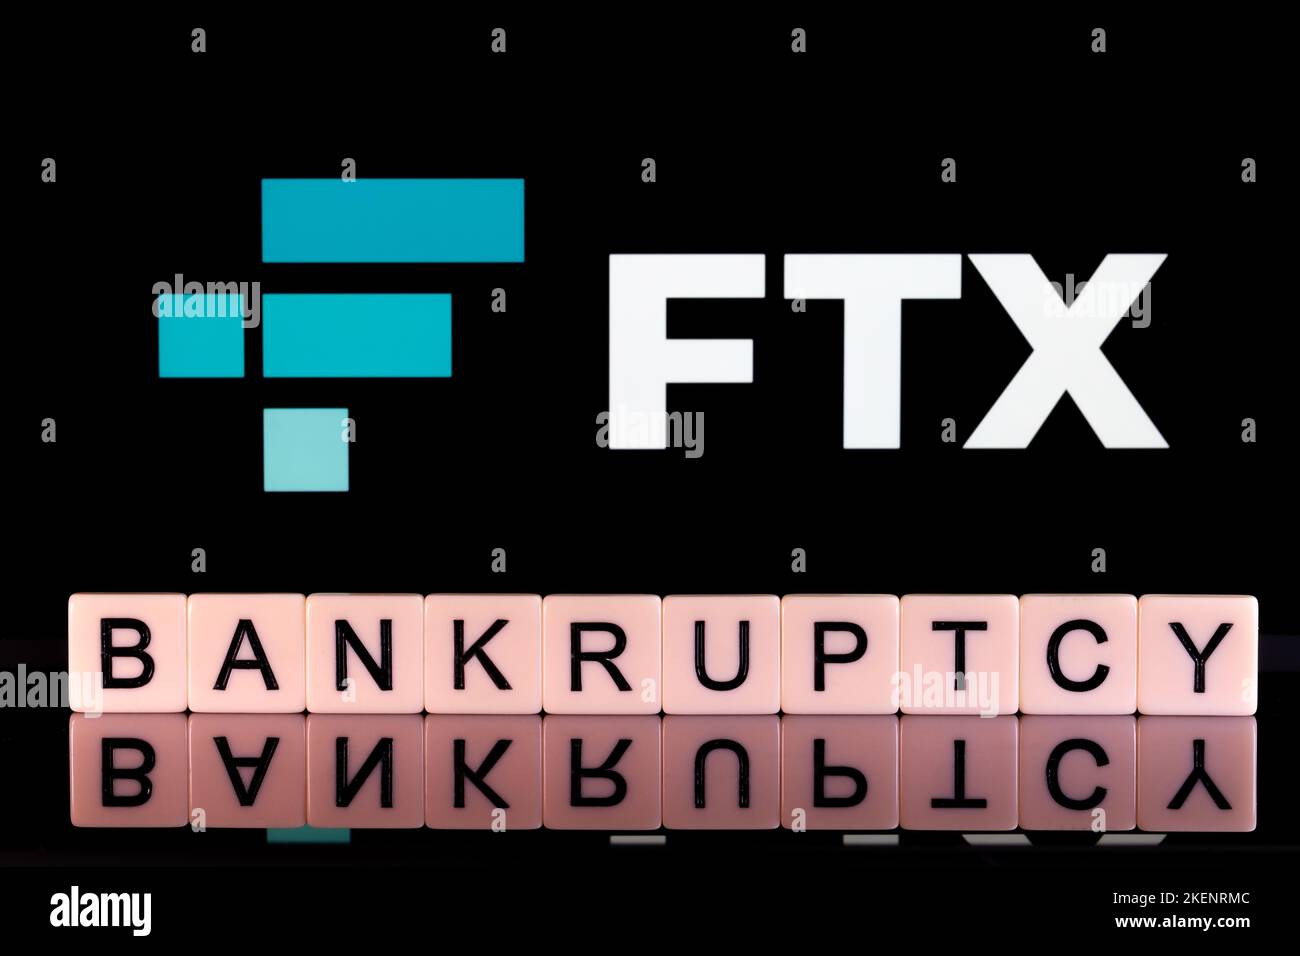 BANKRUPTCY word made of letters seen in front and blurred FTX Cryptocurrency Exchange company logo seen on display. Concept for company bankruptcy. St Stock Photo